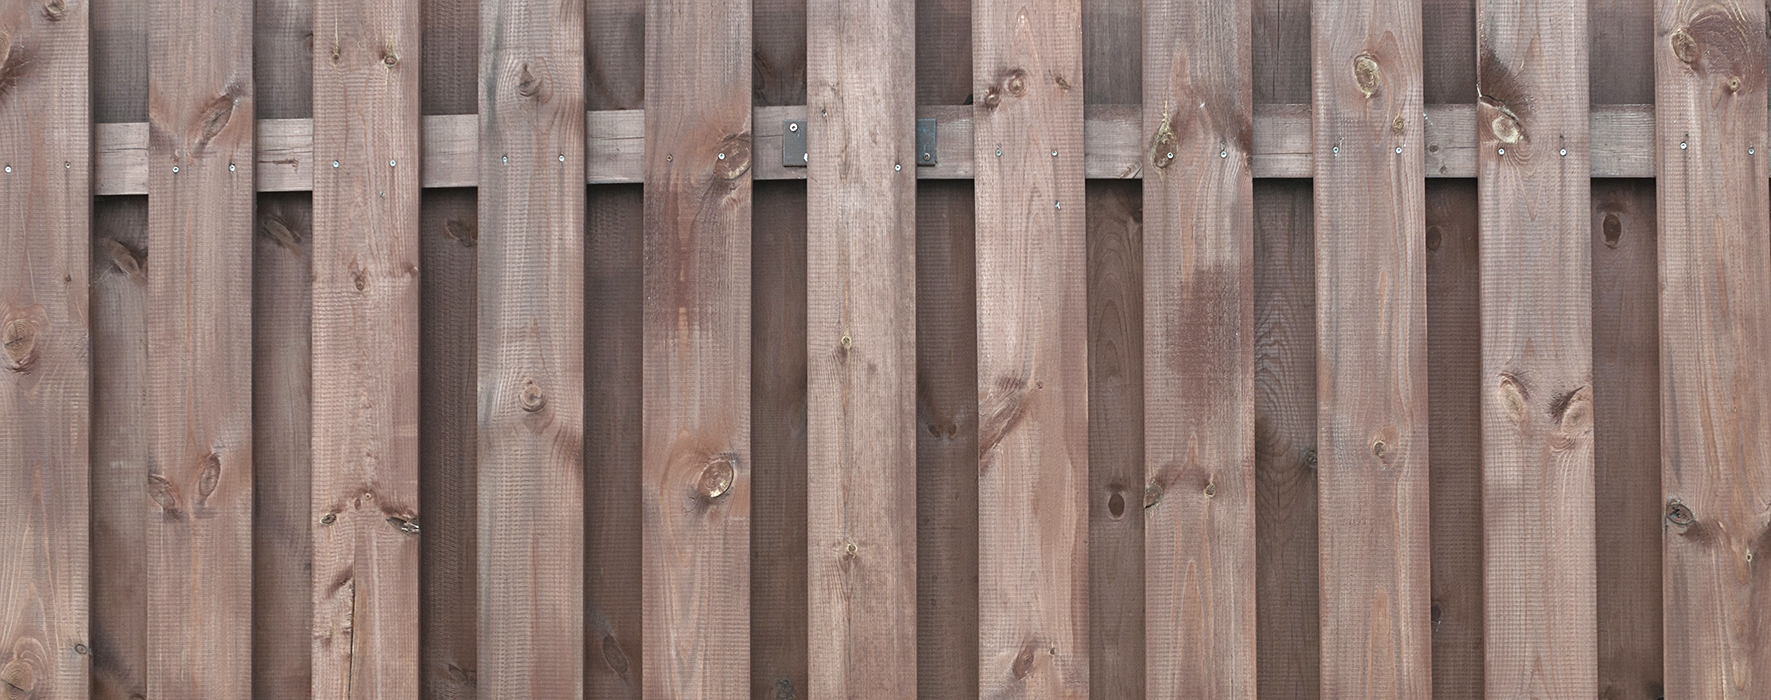 Fence Sales of Sycamore offers a vareity of wood fences.